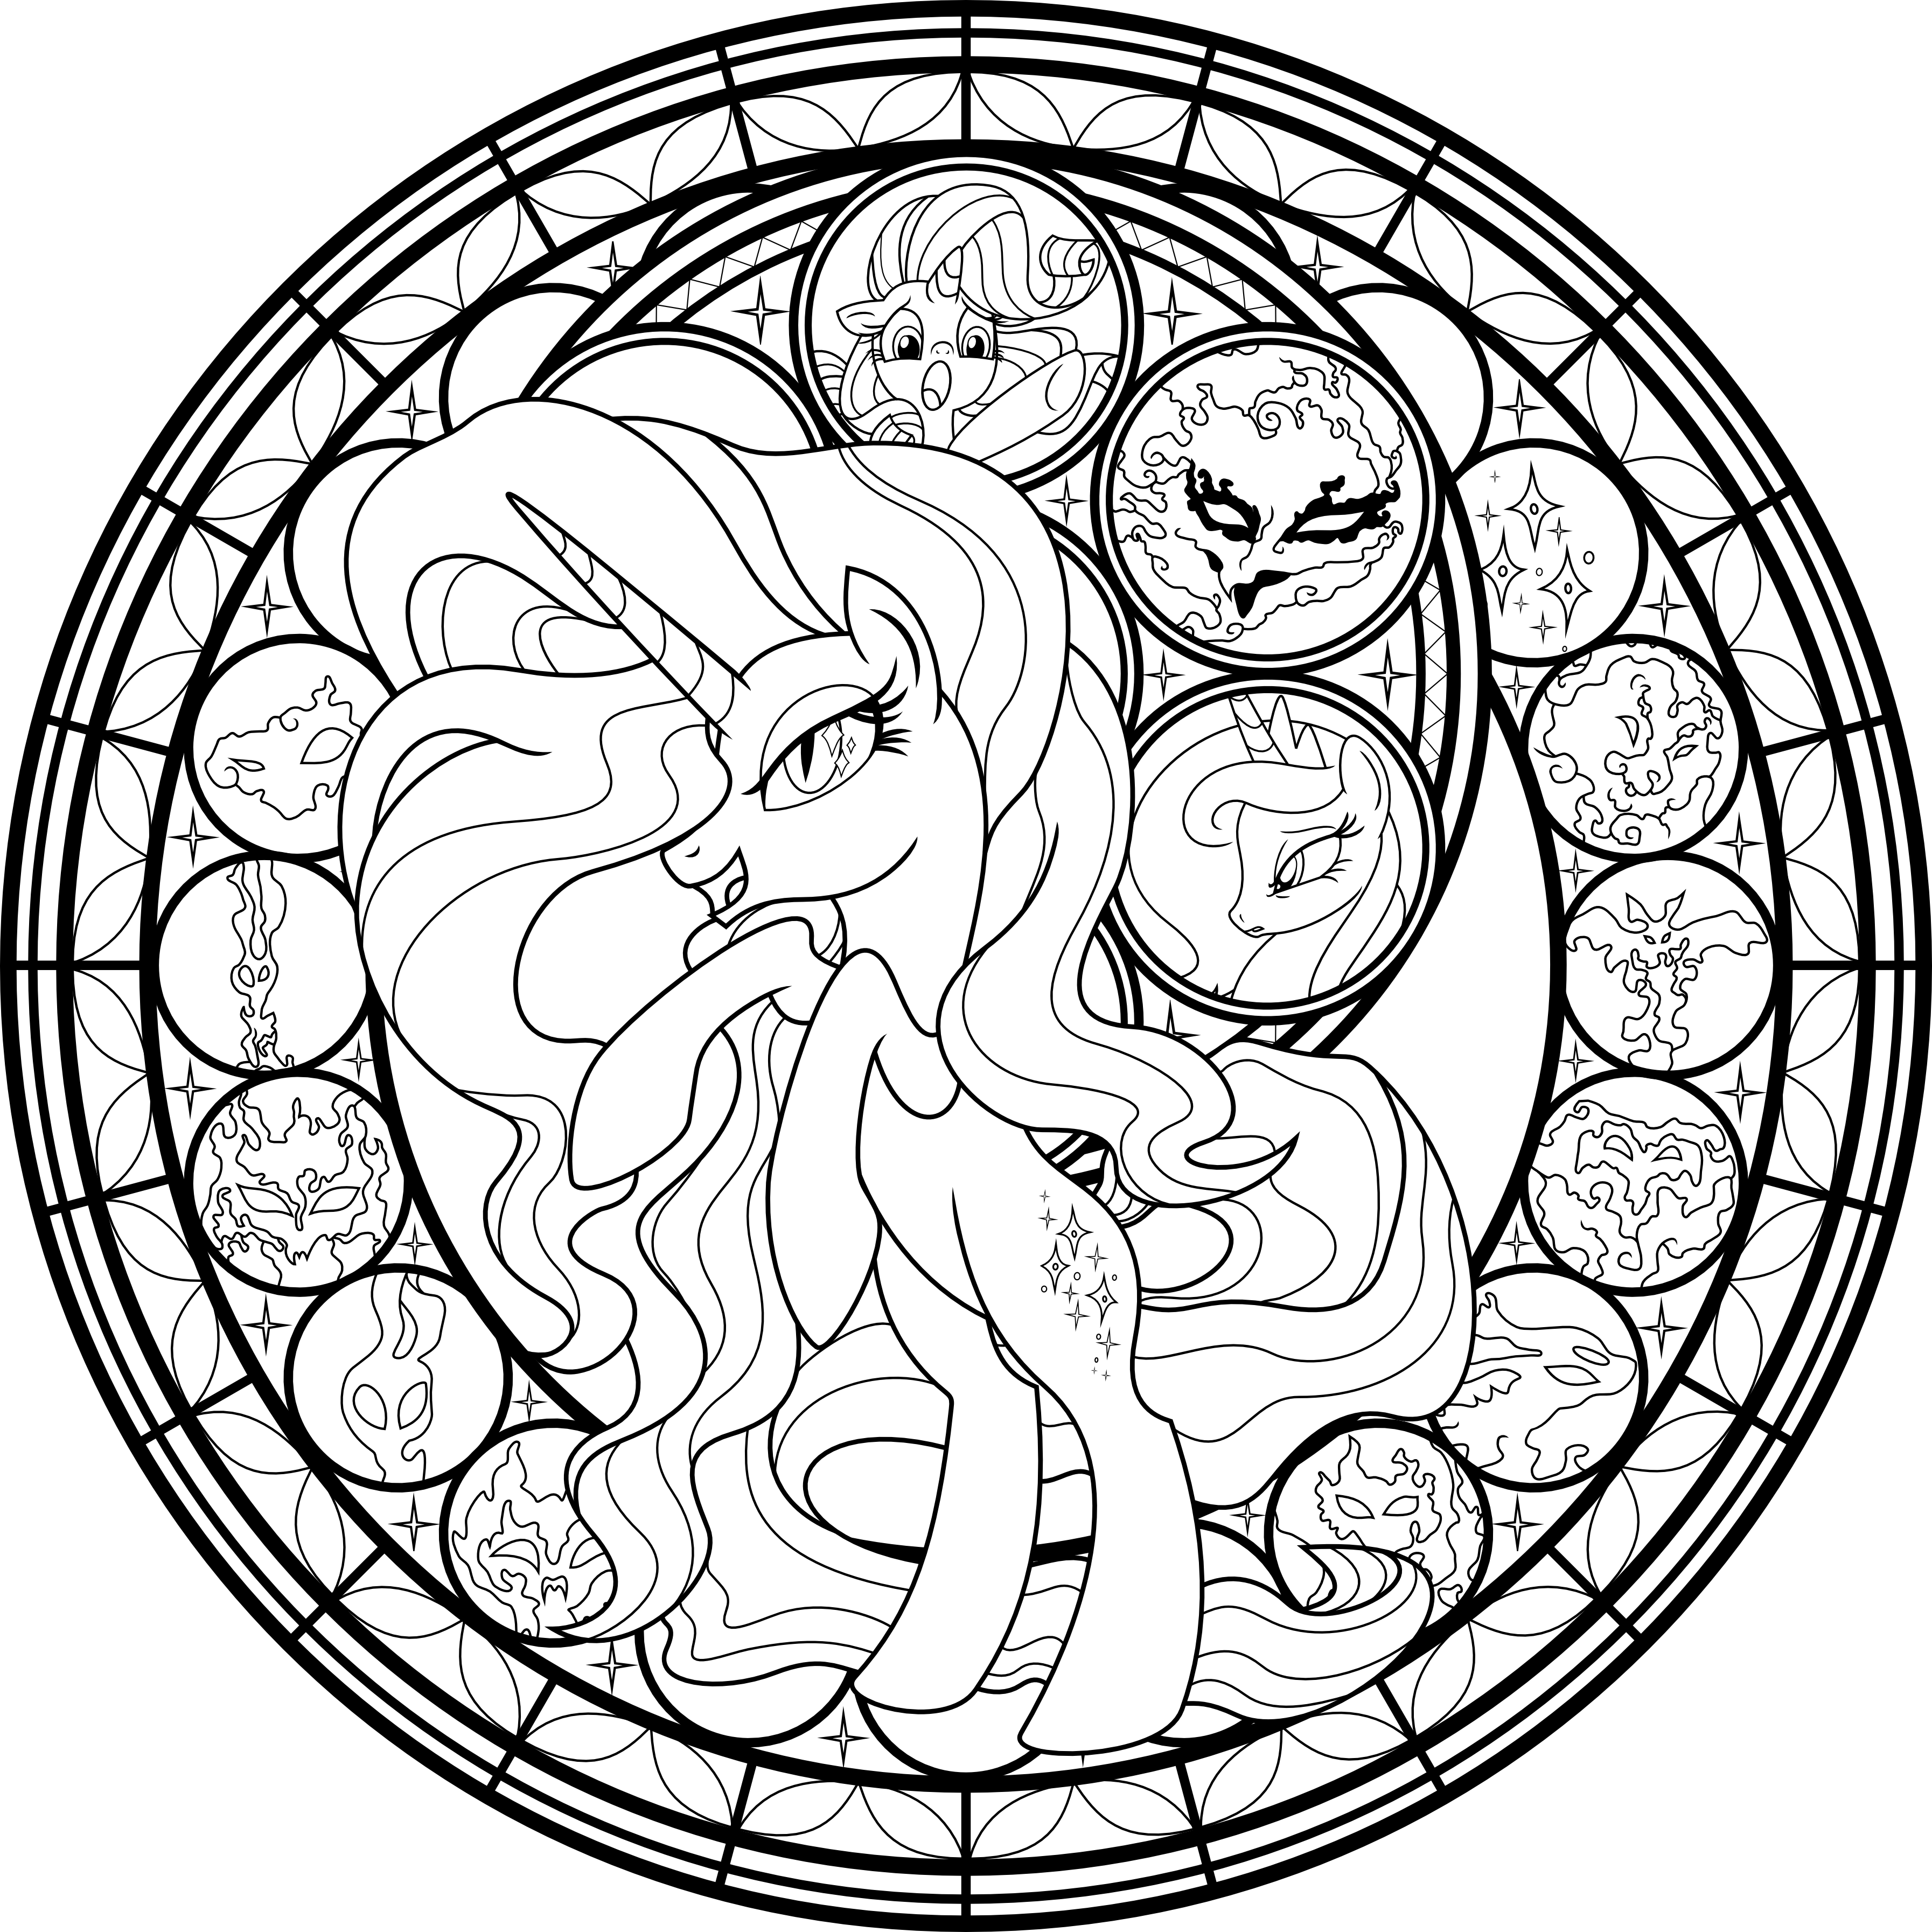 Free Coloring Pages Of My Little Pony Friendship Is Magic - Coloring Home